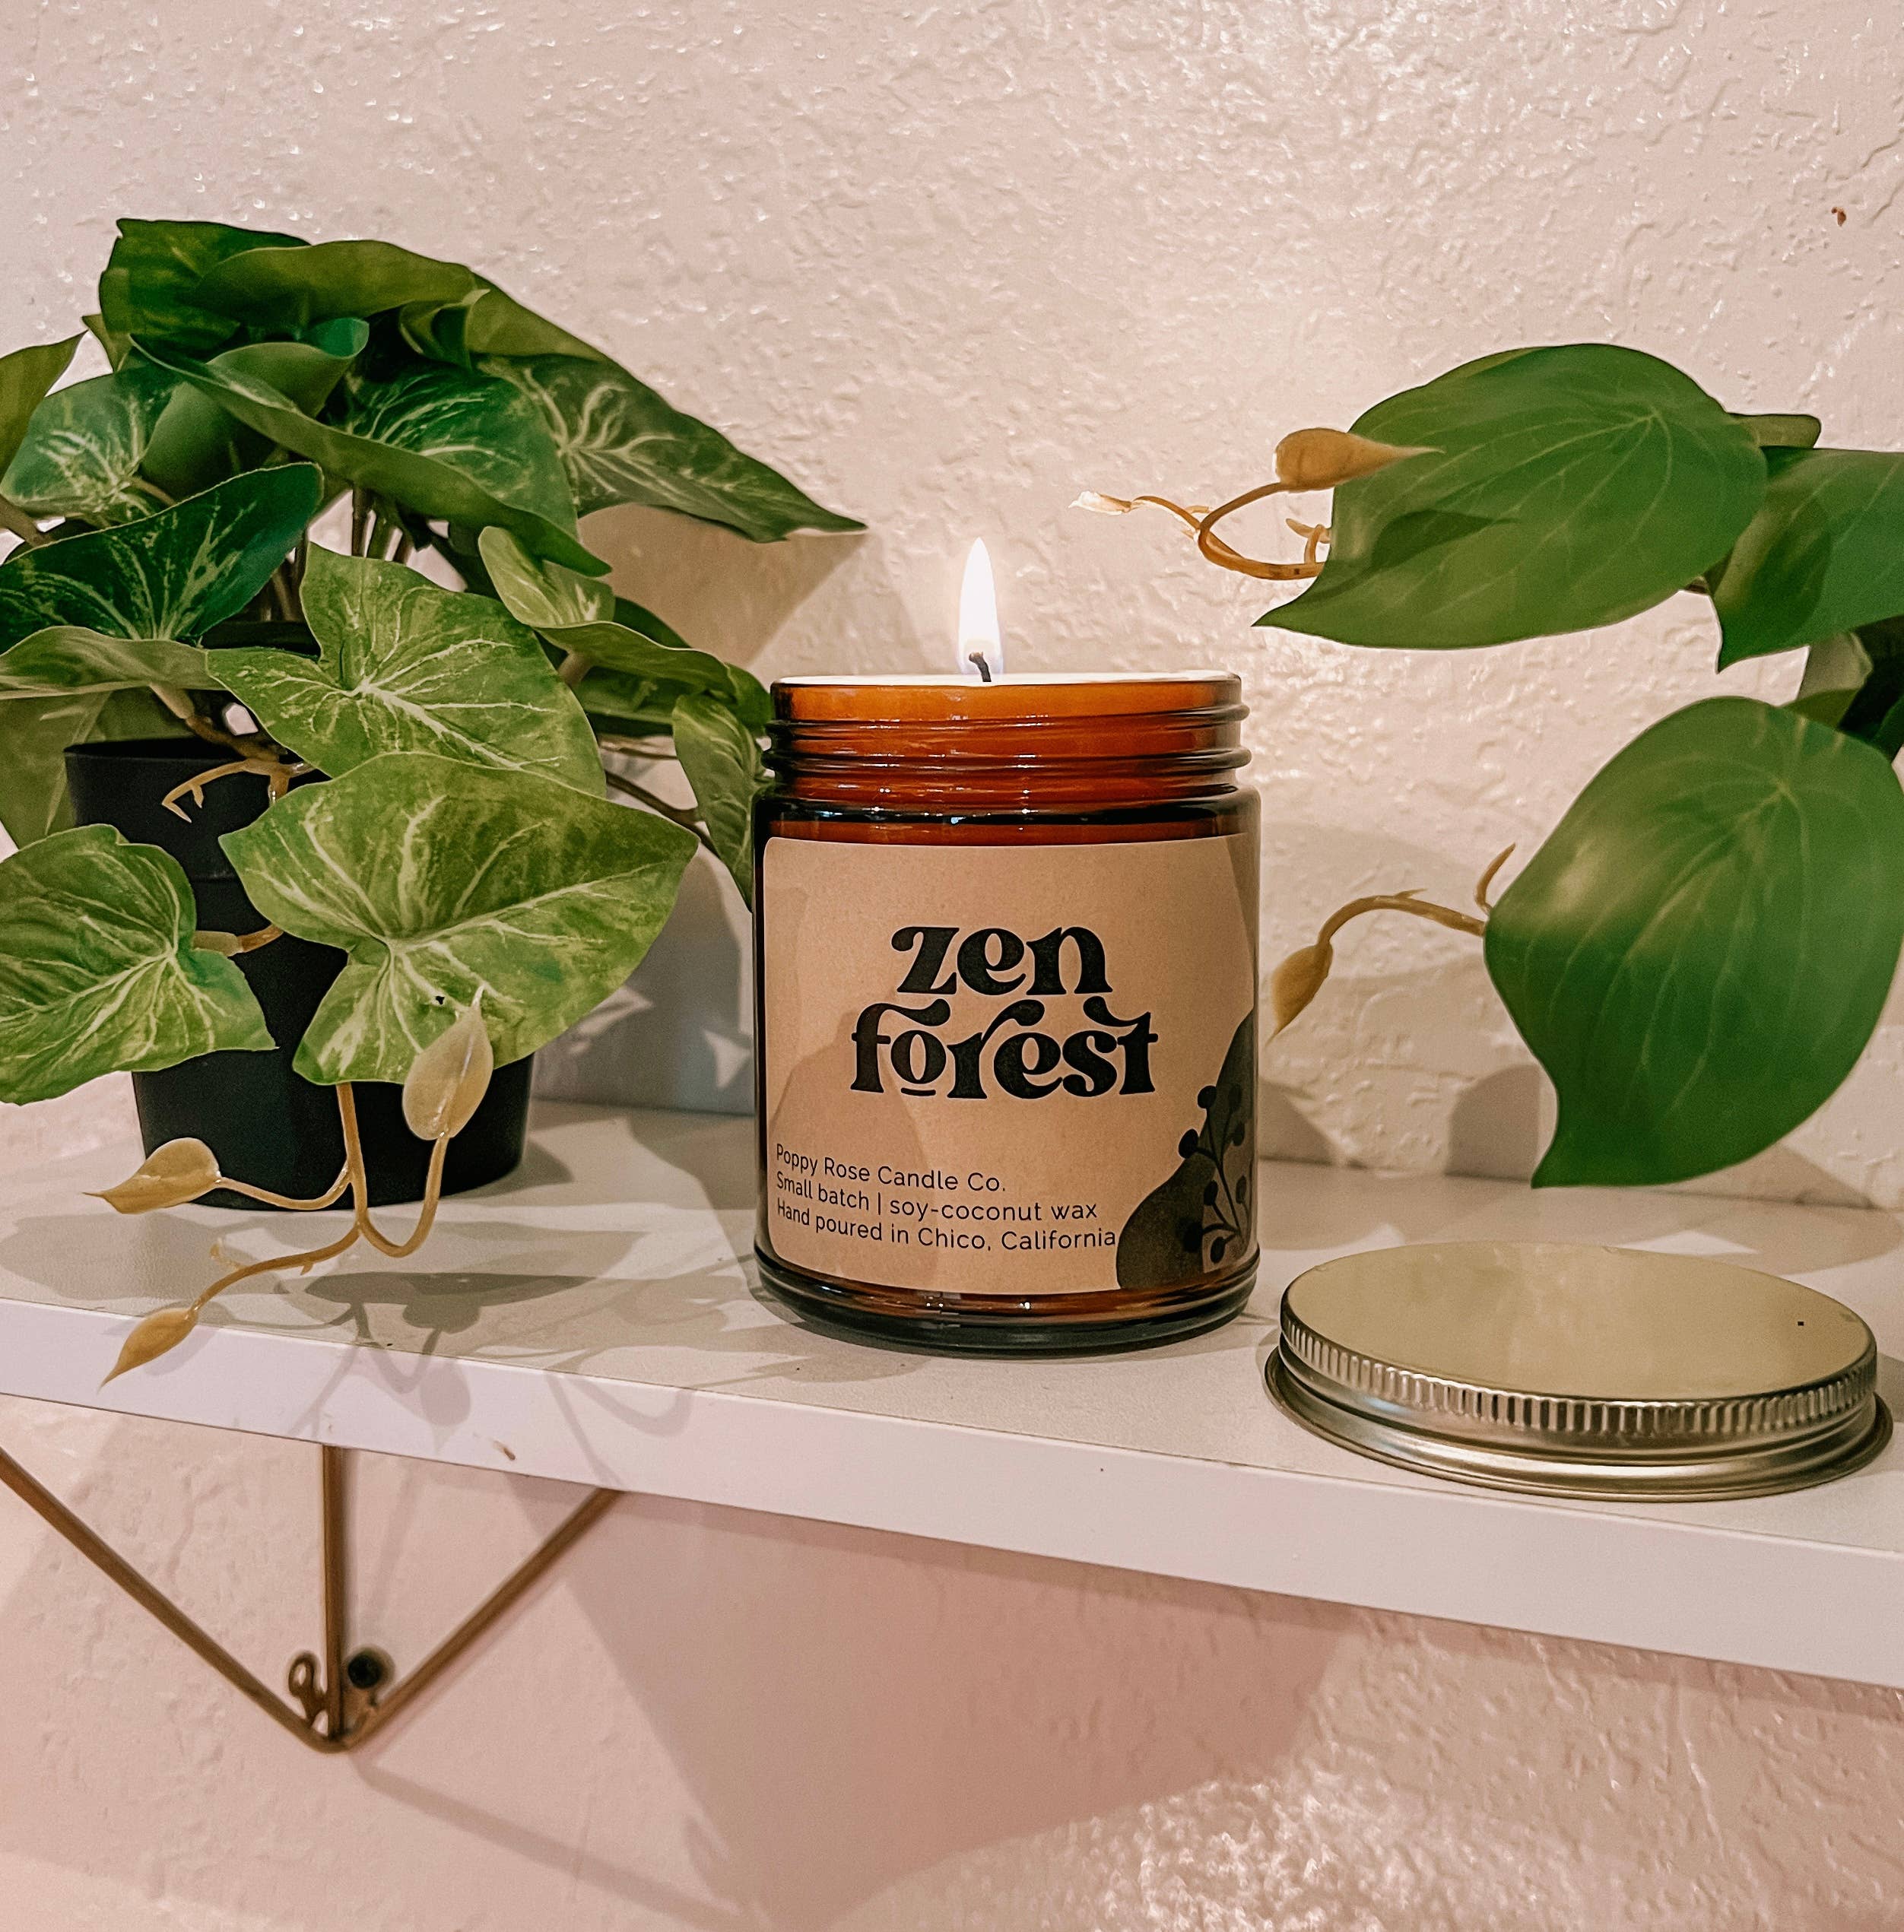 Zen Forest Coconut Wax Candle